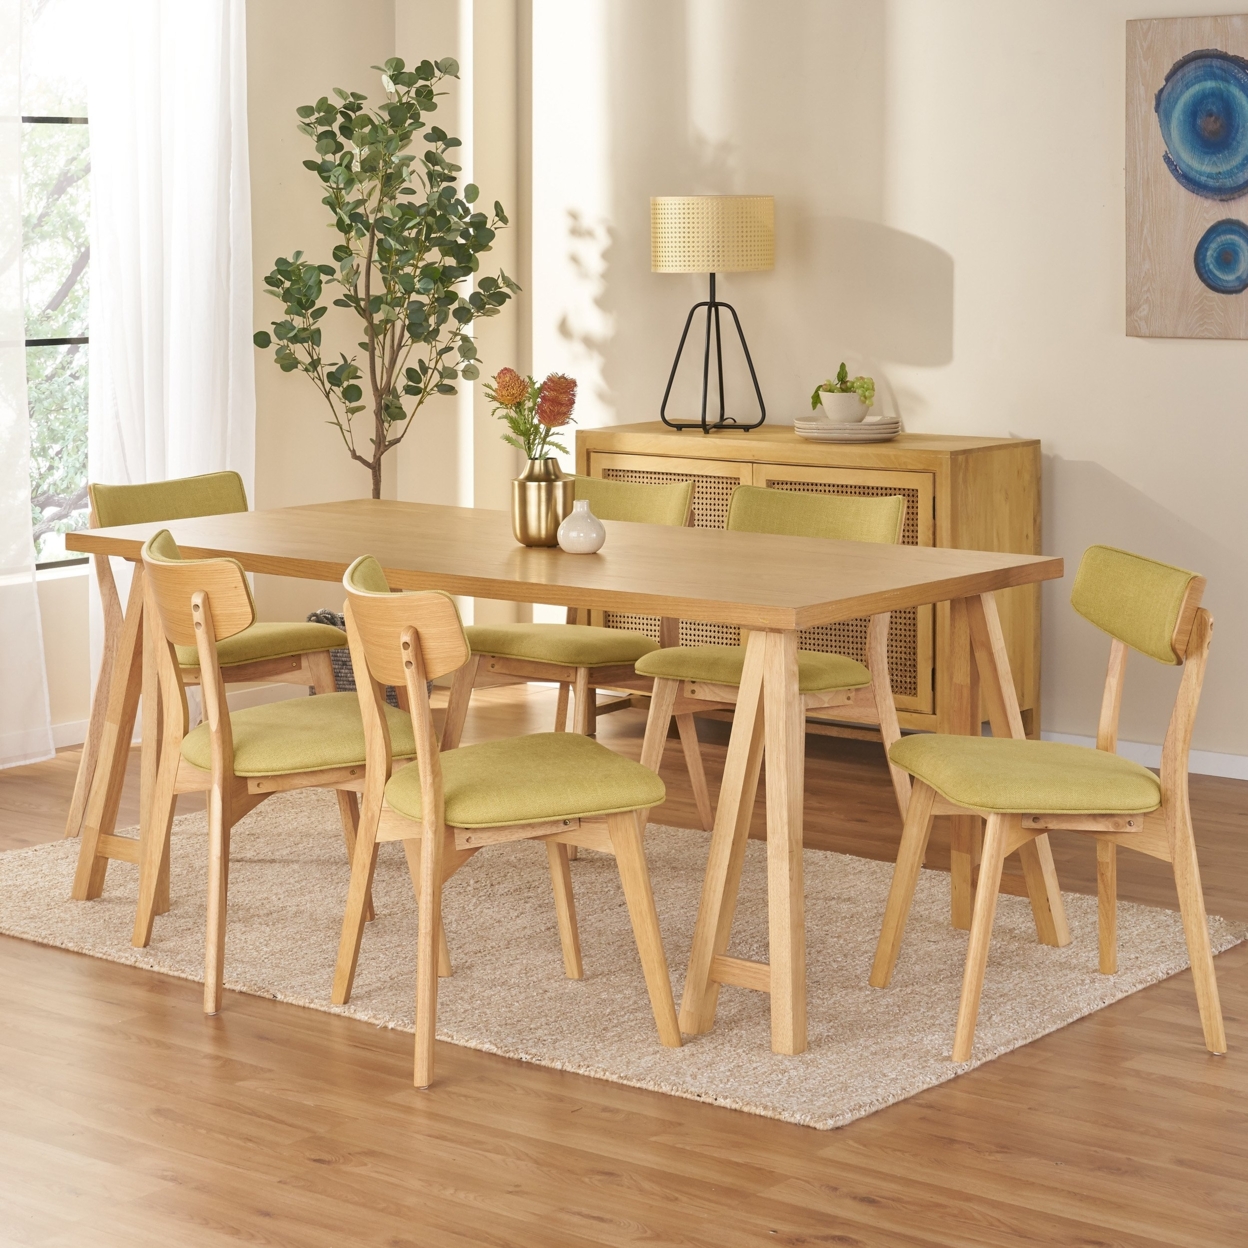 Turat Mid-Century Modern 7 Piece Dining Set With A-Frame Table - Natural Oak/green Tea